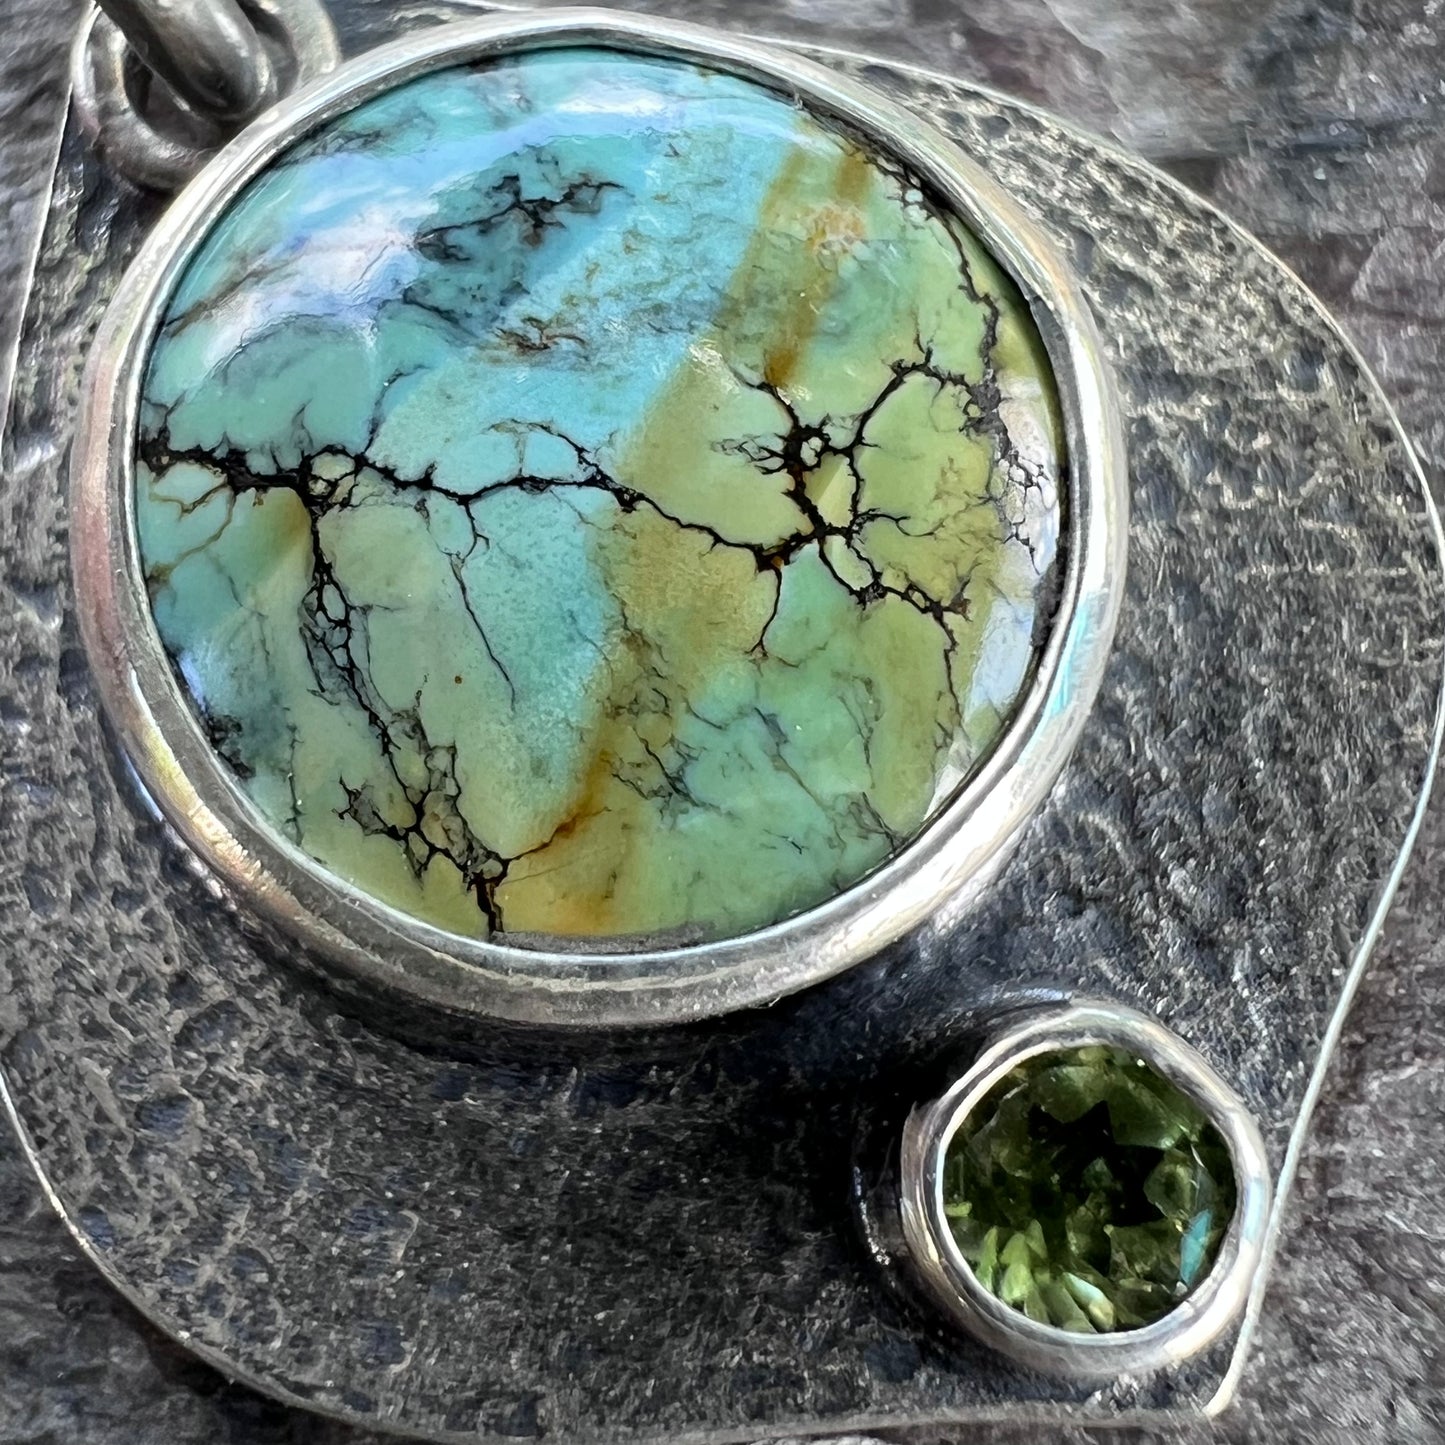 Turquoise and Peridot Sterling Silver Pendant - One-of-a-Kind Handmade Pendant